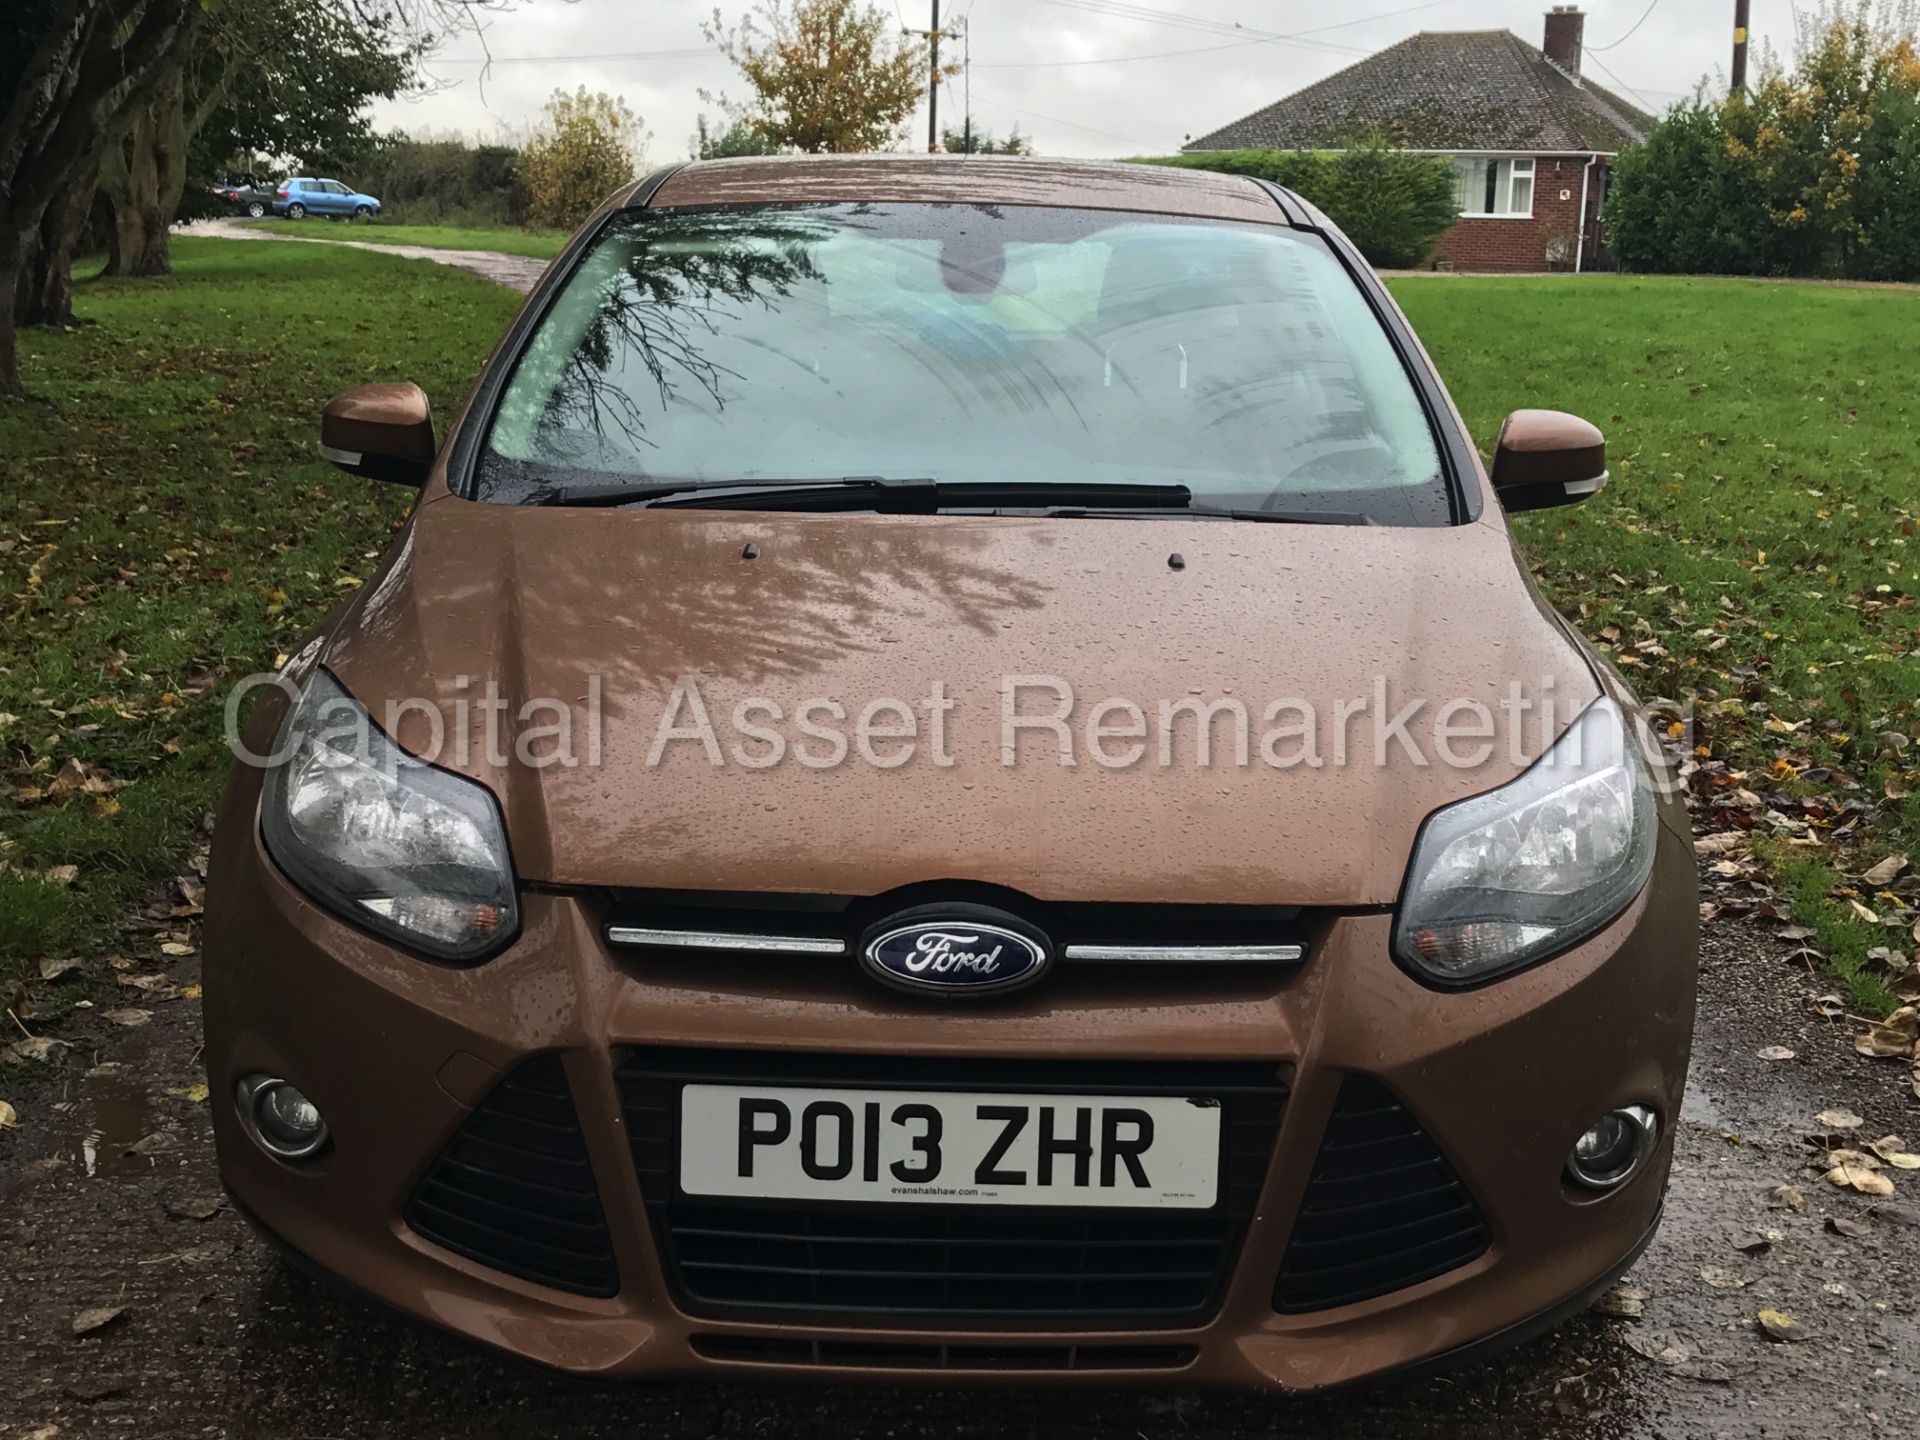 (On Sale) FORD FOCUS 'ZETEC' (2013 - 13 REG) '1.6 TDCI - 6 SPEED - STOP / START - AIR CON - 65 MPG+ - Image 8 of 24